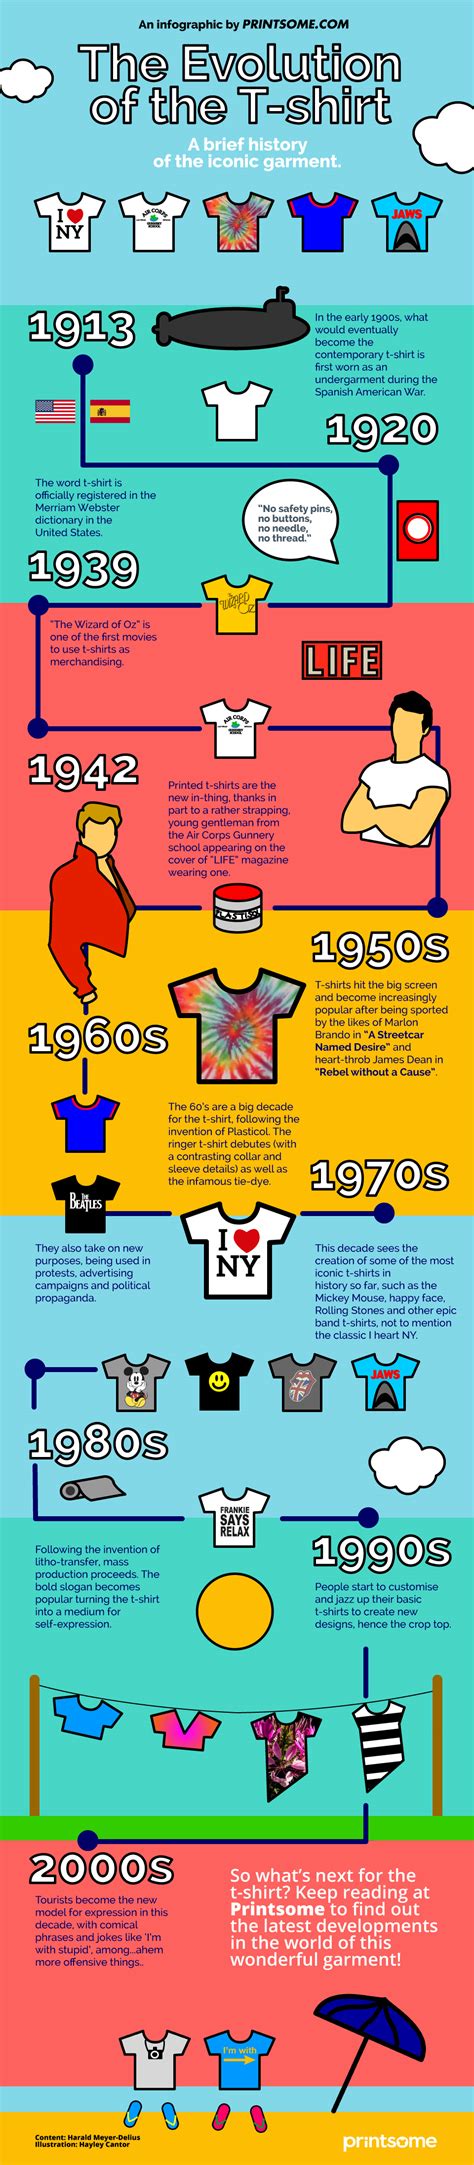 Infographic Evolution Of The T Shirt In The Uk And The Rest Of The World